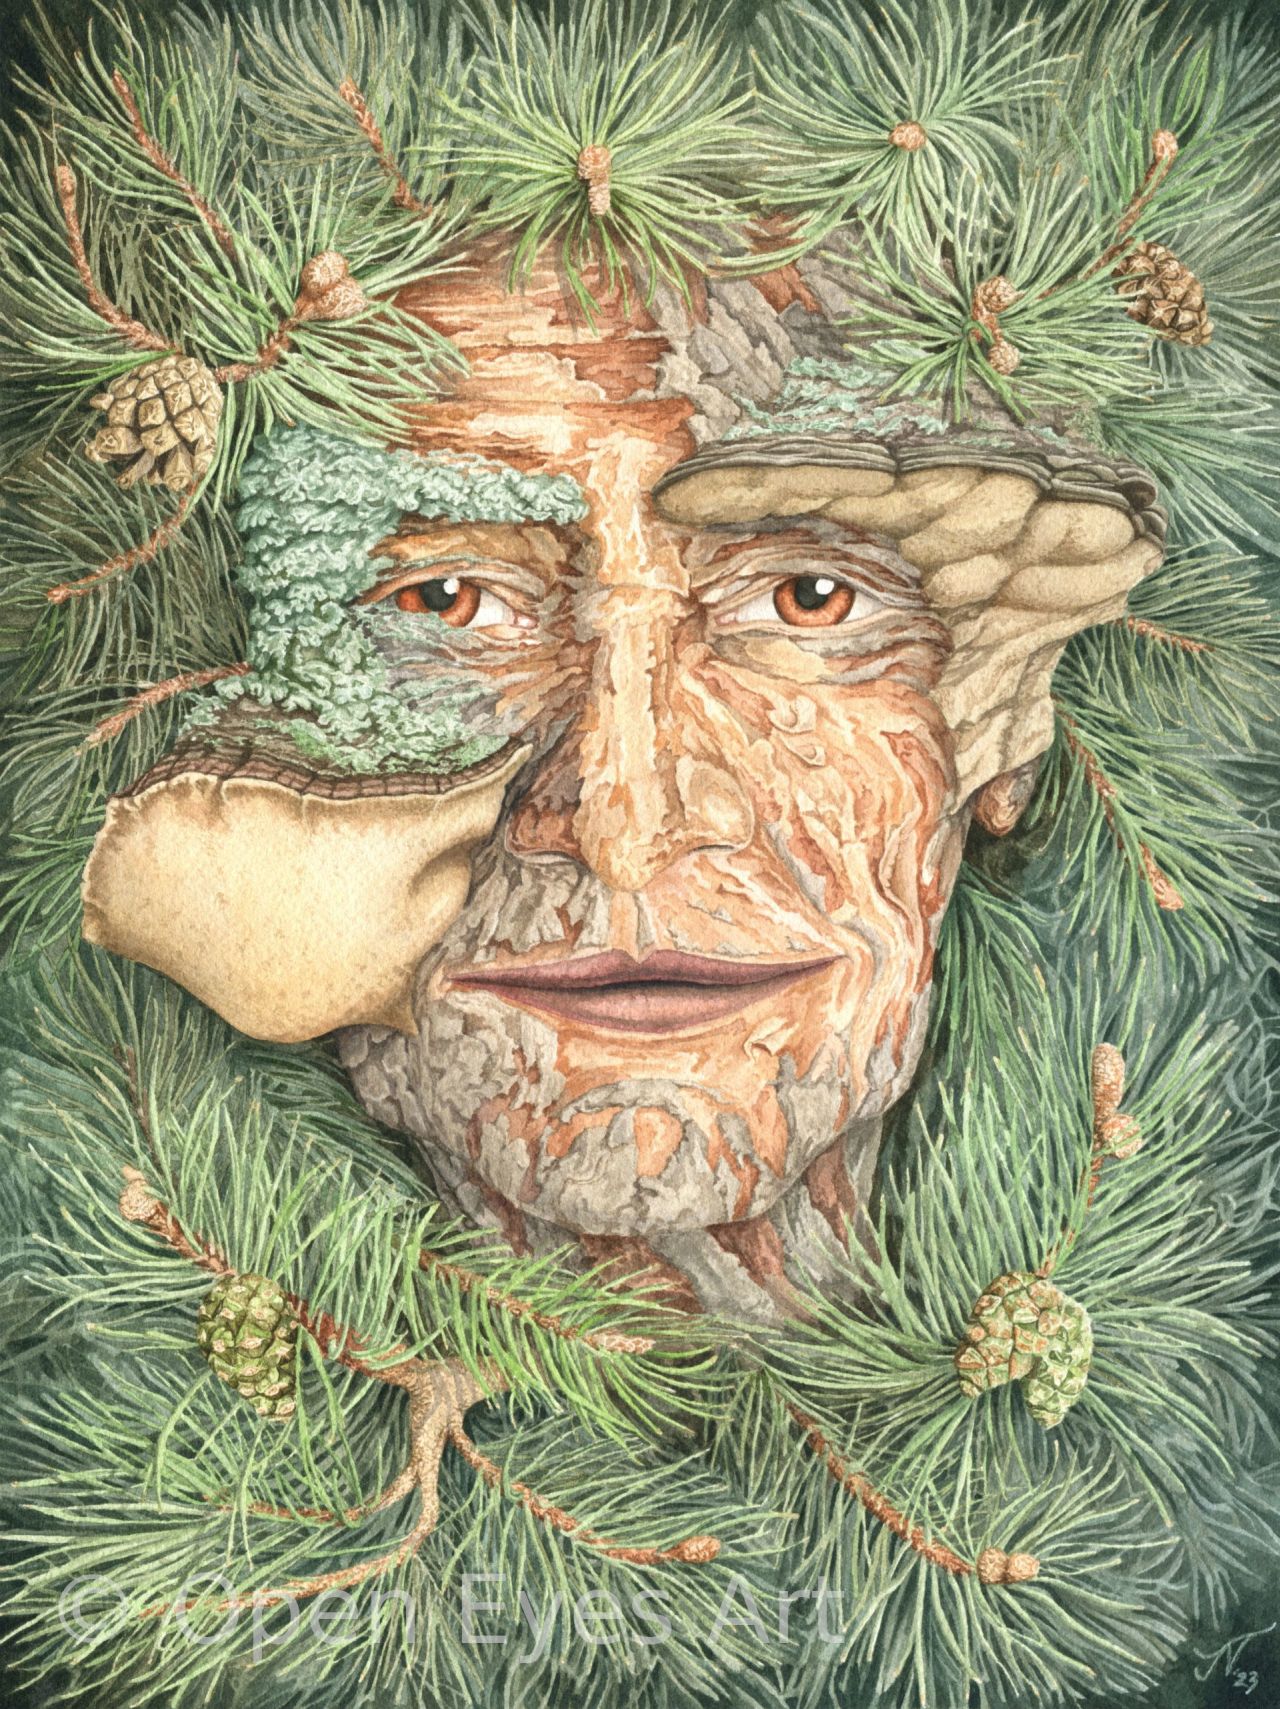 painting of a pine dryad with phellinus pini in their face